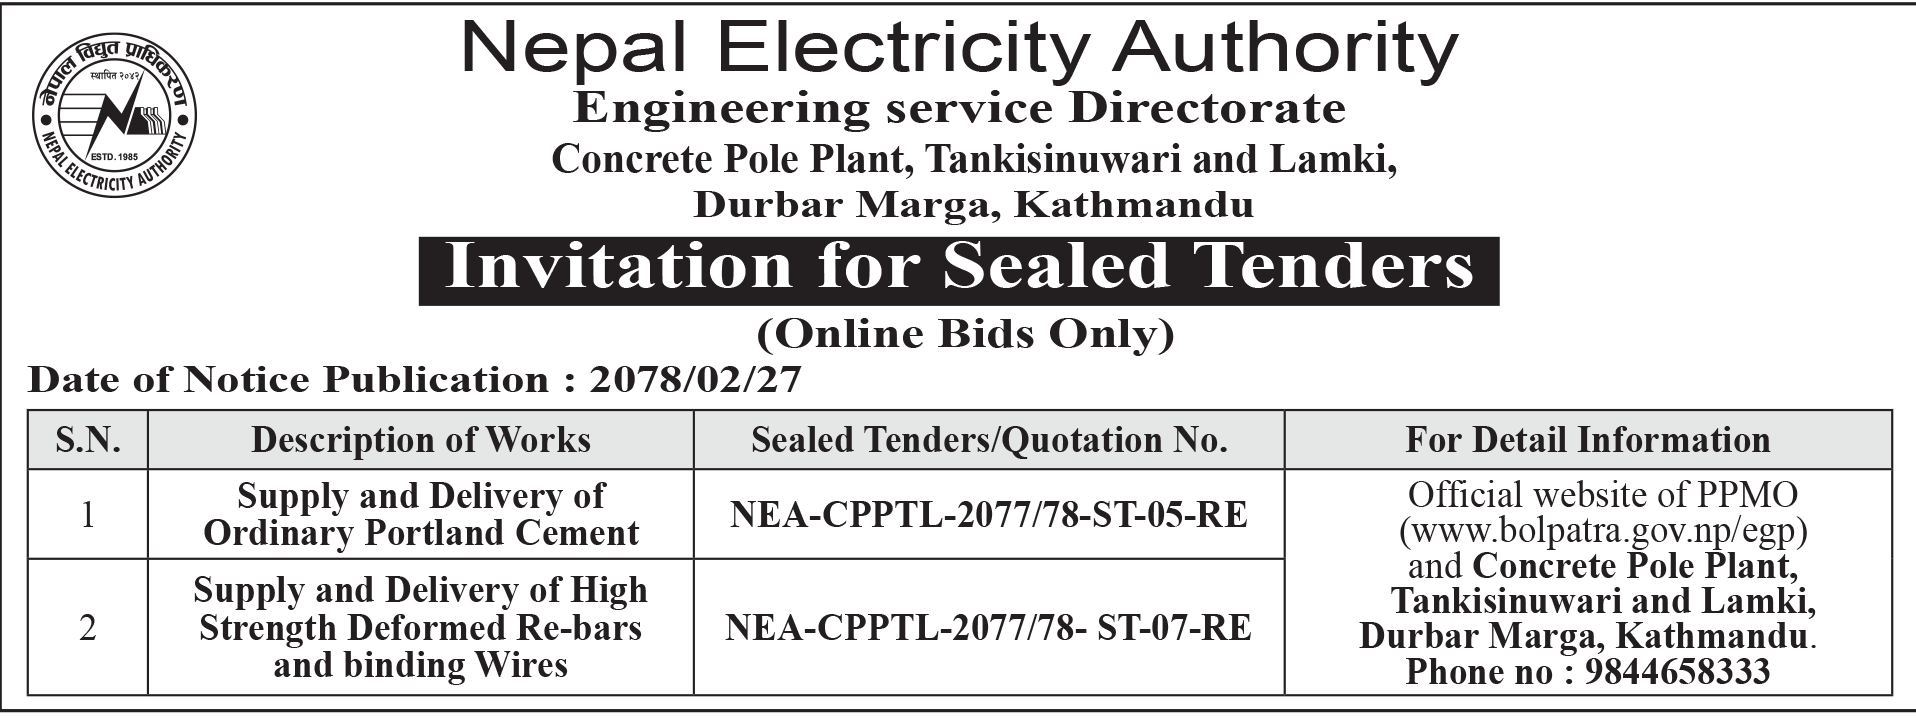 Nepal Electricity Authority, Engineering Service Directorate, Concrete Pole Plant, Tankisinuwari and Lamki, Durbarmarg announces to sealed tender for supply and delivery of OPC and High Strength Deformed Re-bars and binding wires. Image 14(2).png